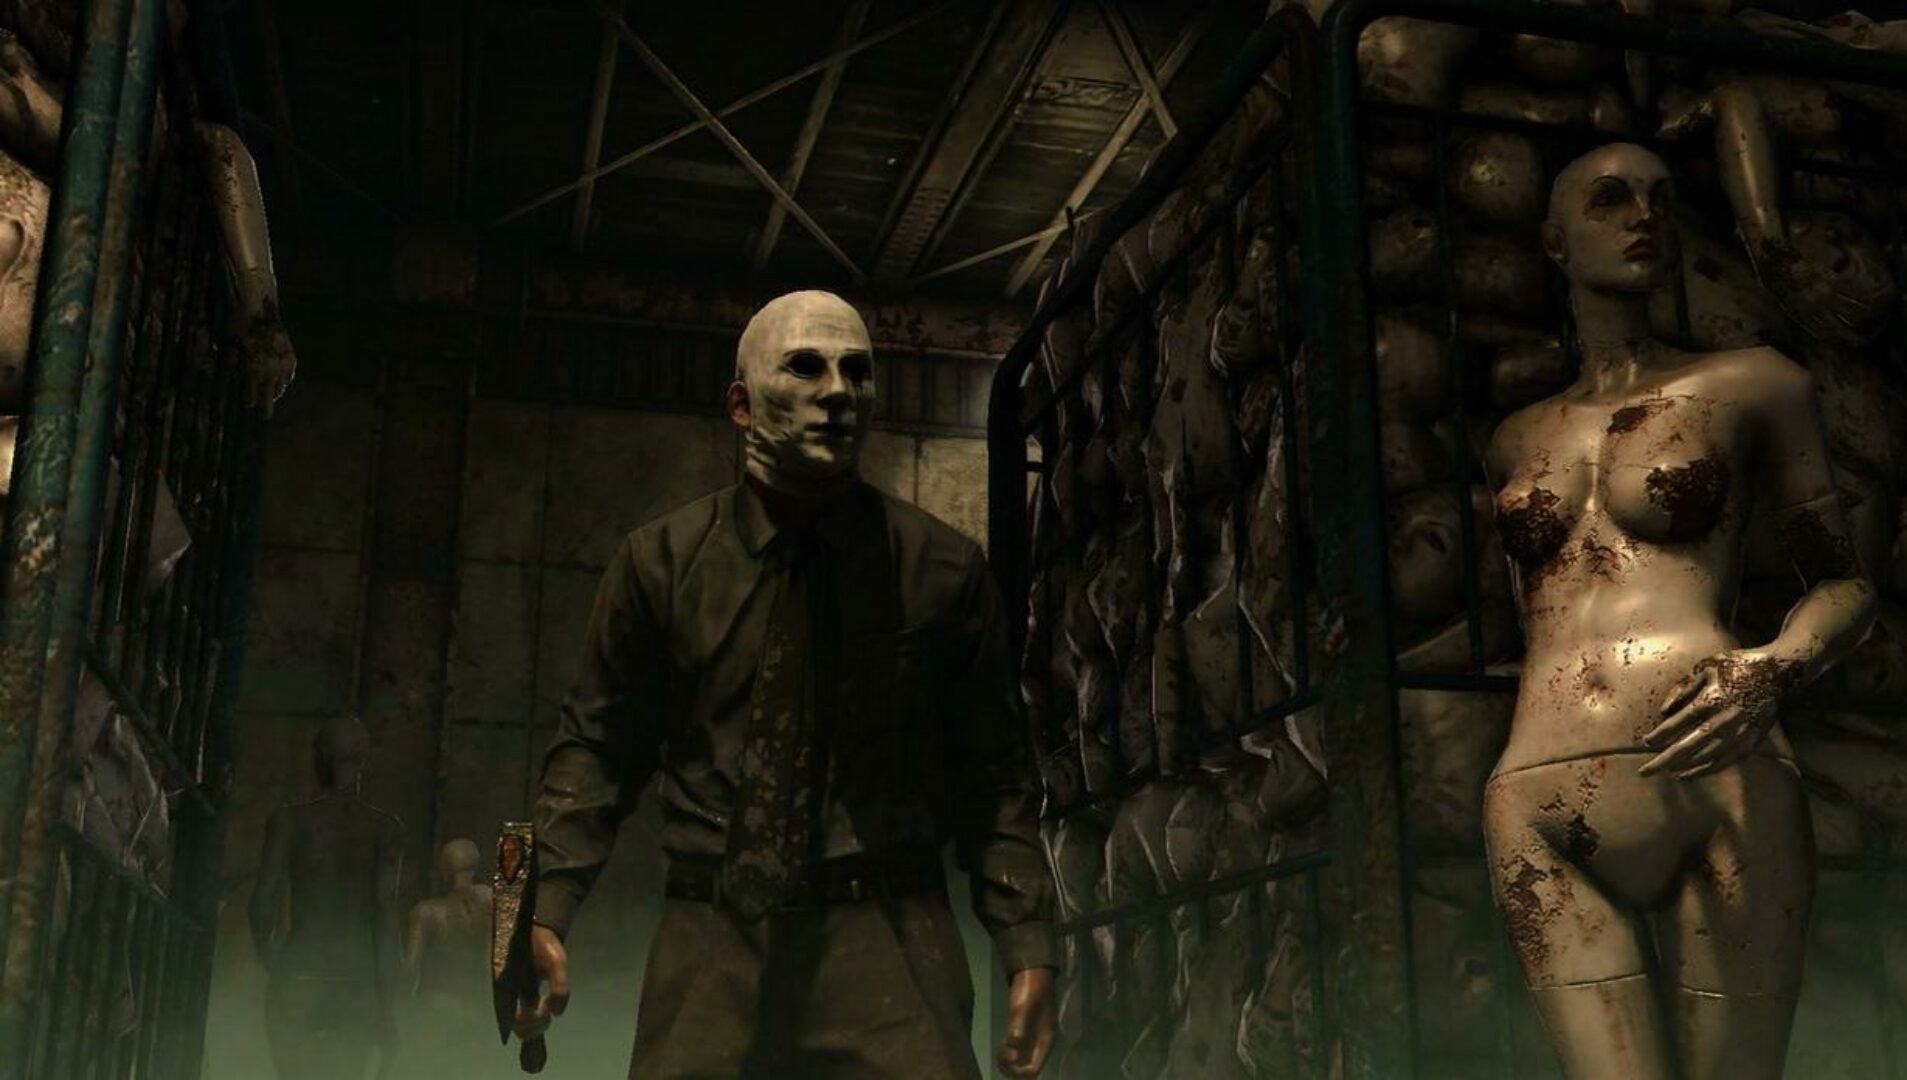 Bethesda Releases New Gameplay Trailer for The Evil Within